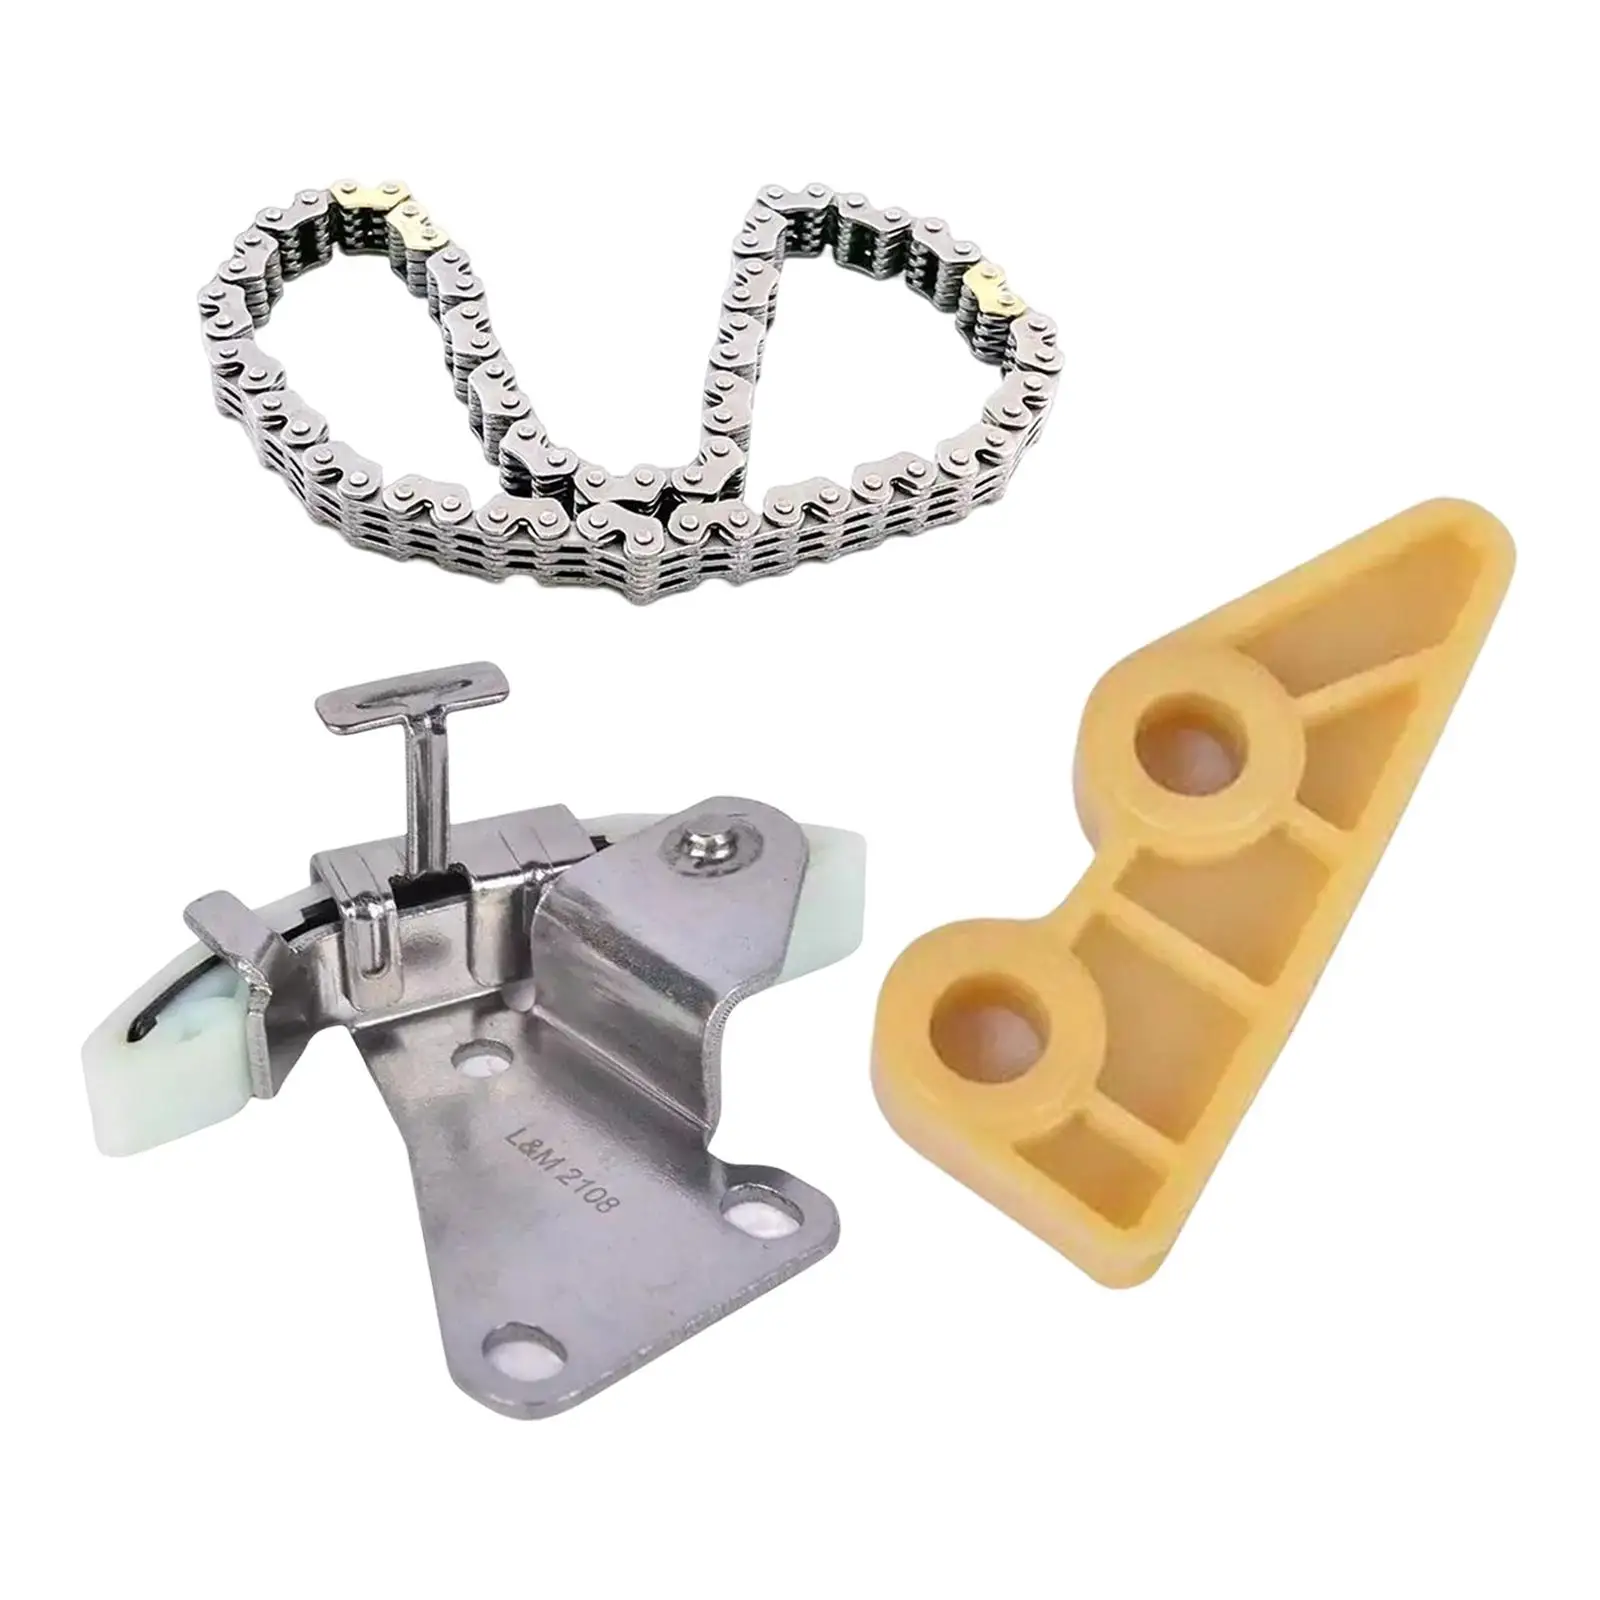 Vehicle Oil Pump Chain Tensioner Guide Kit Durable 13450-Pna-004 Spare Parts